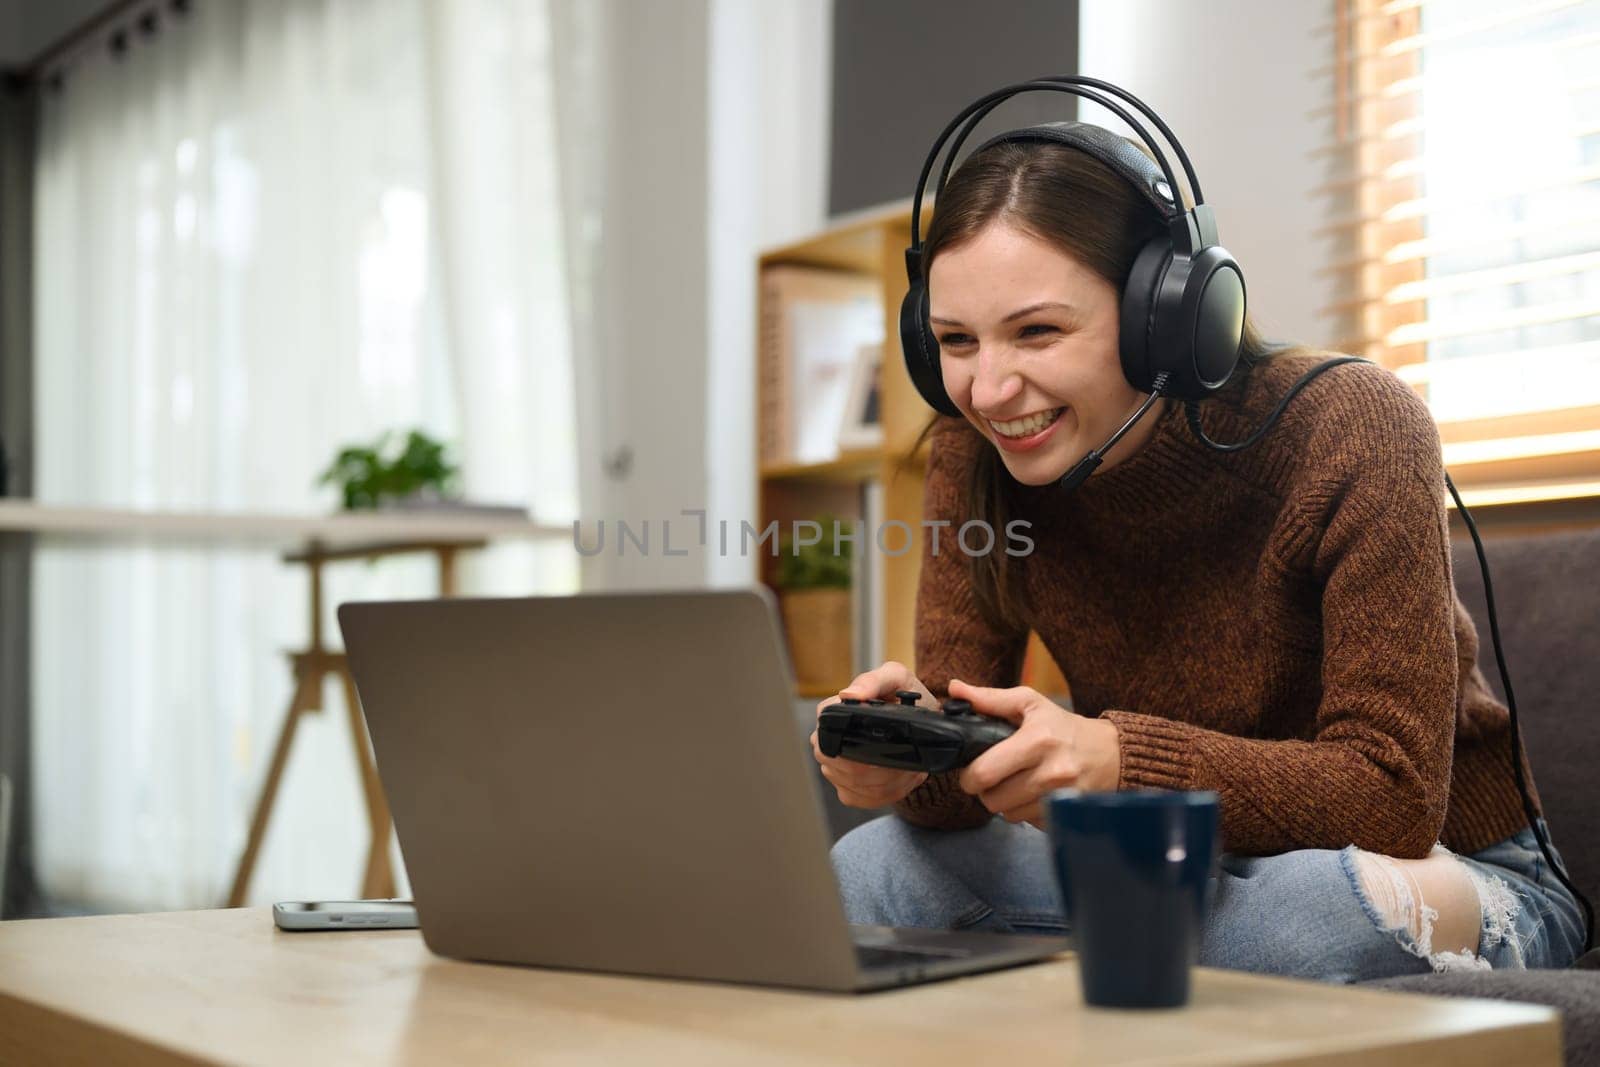 Young caucasian woman in headset holding joystick playing video game on laptop by prathanchorruangsak